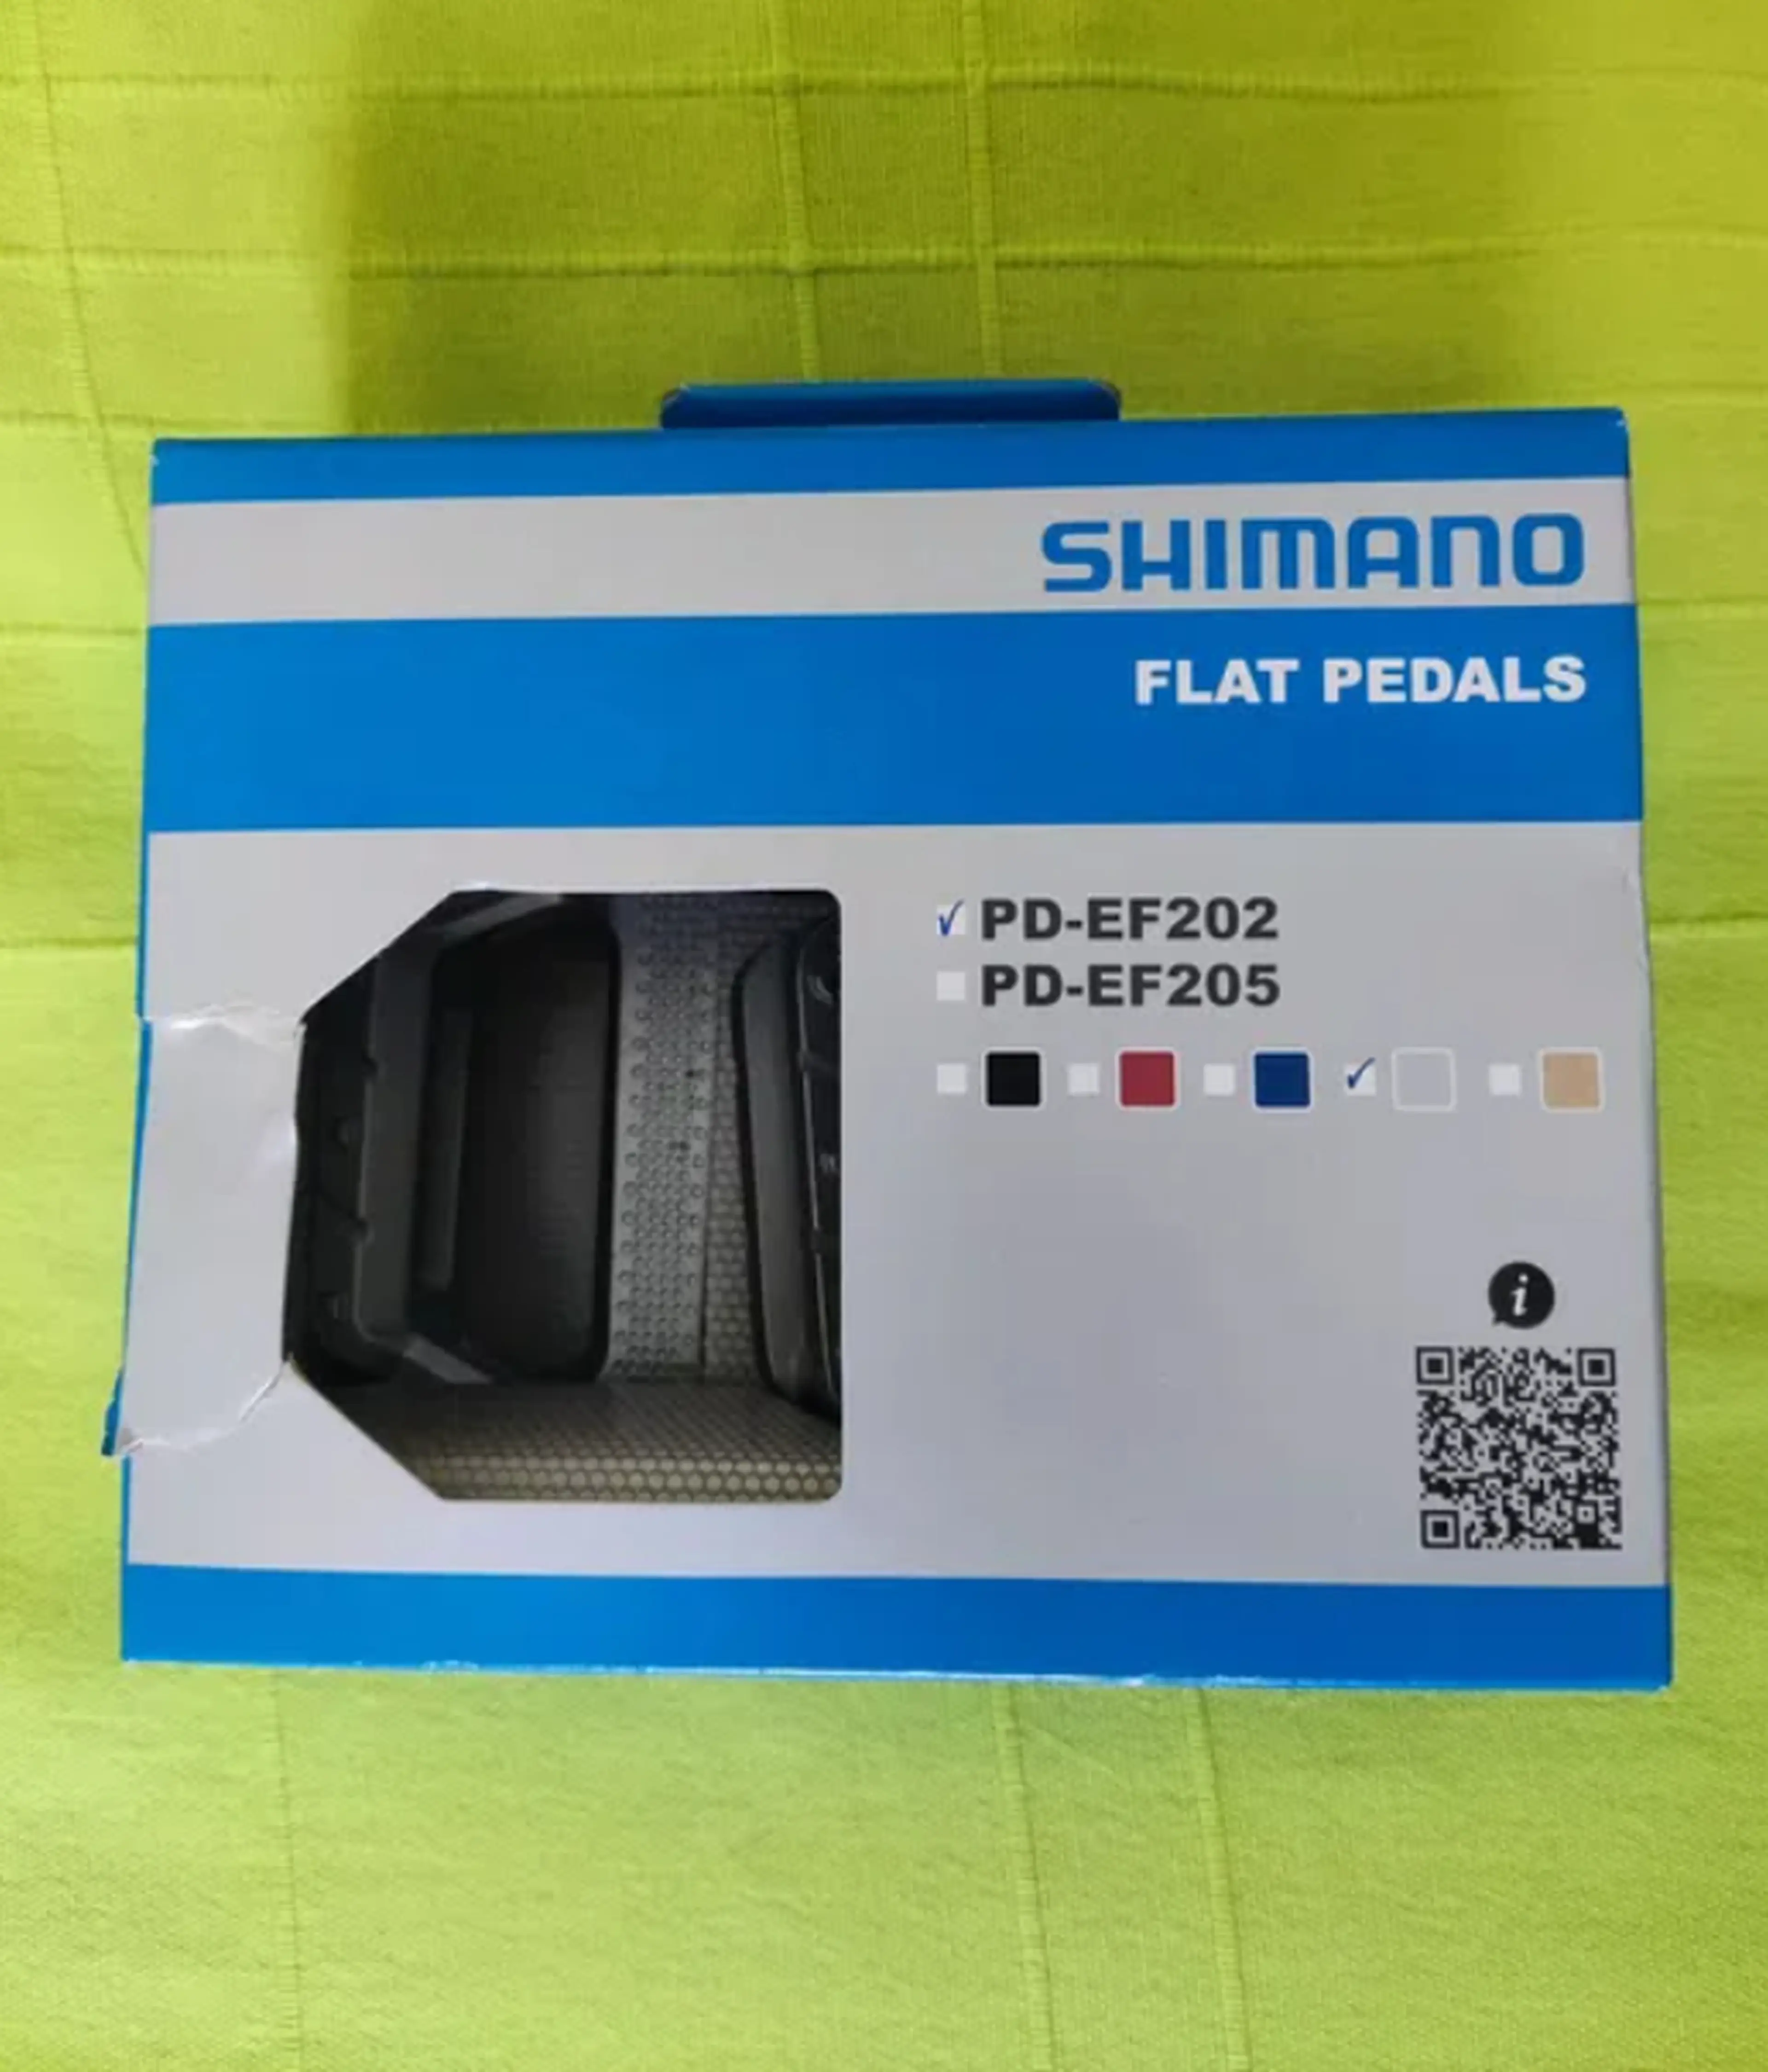 2. Pedale flat Shimano PD-EF202